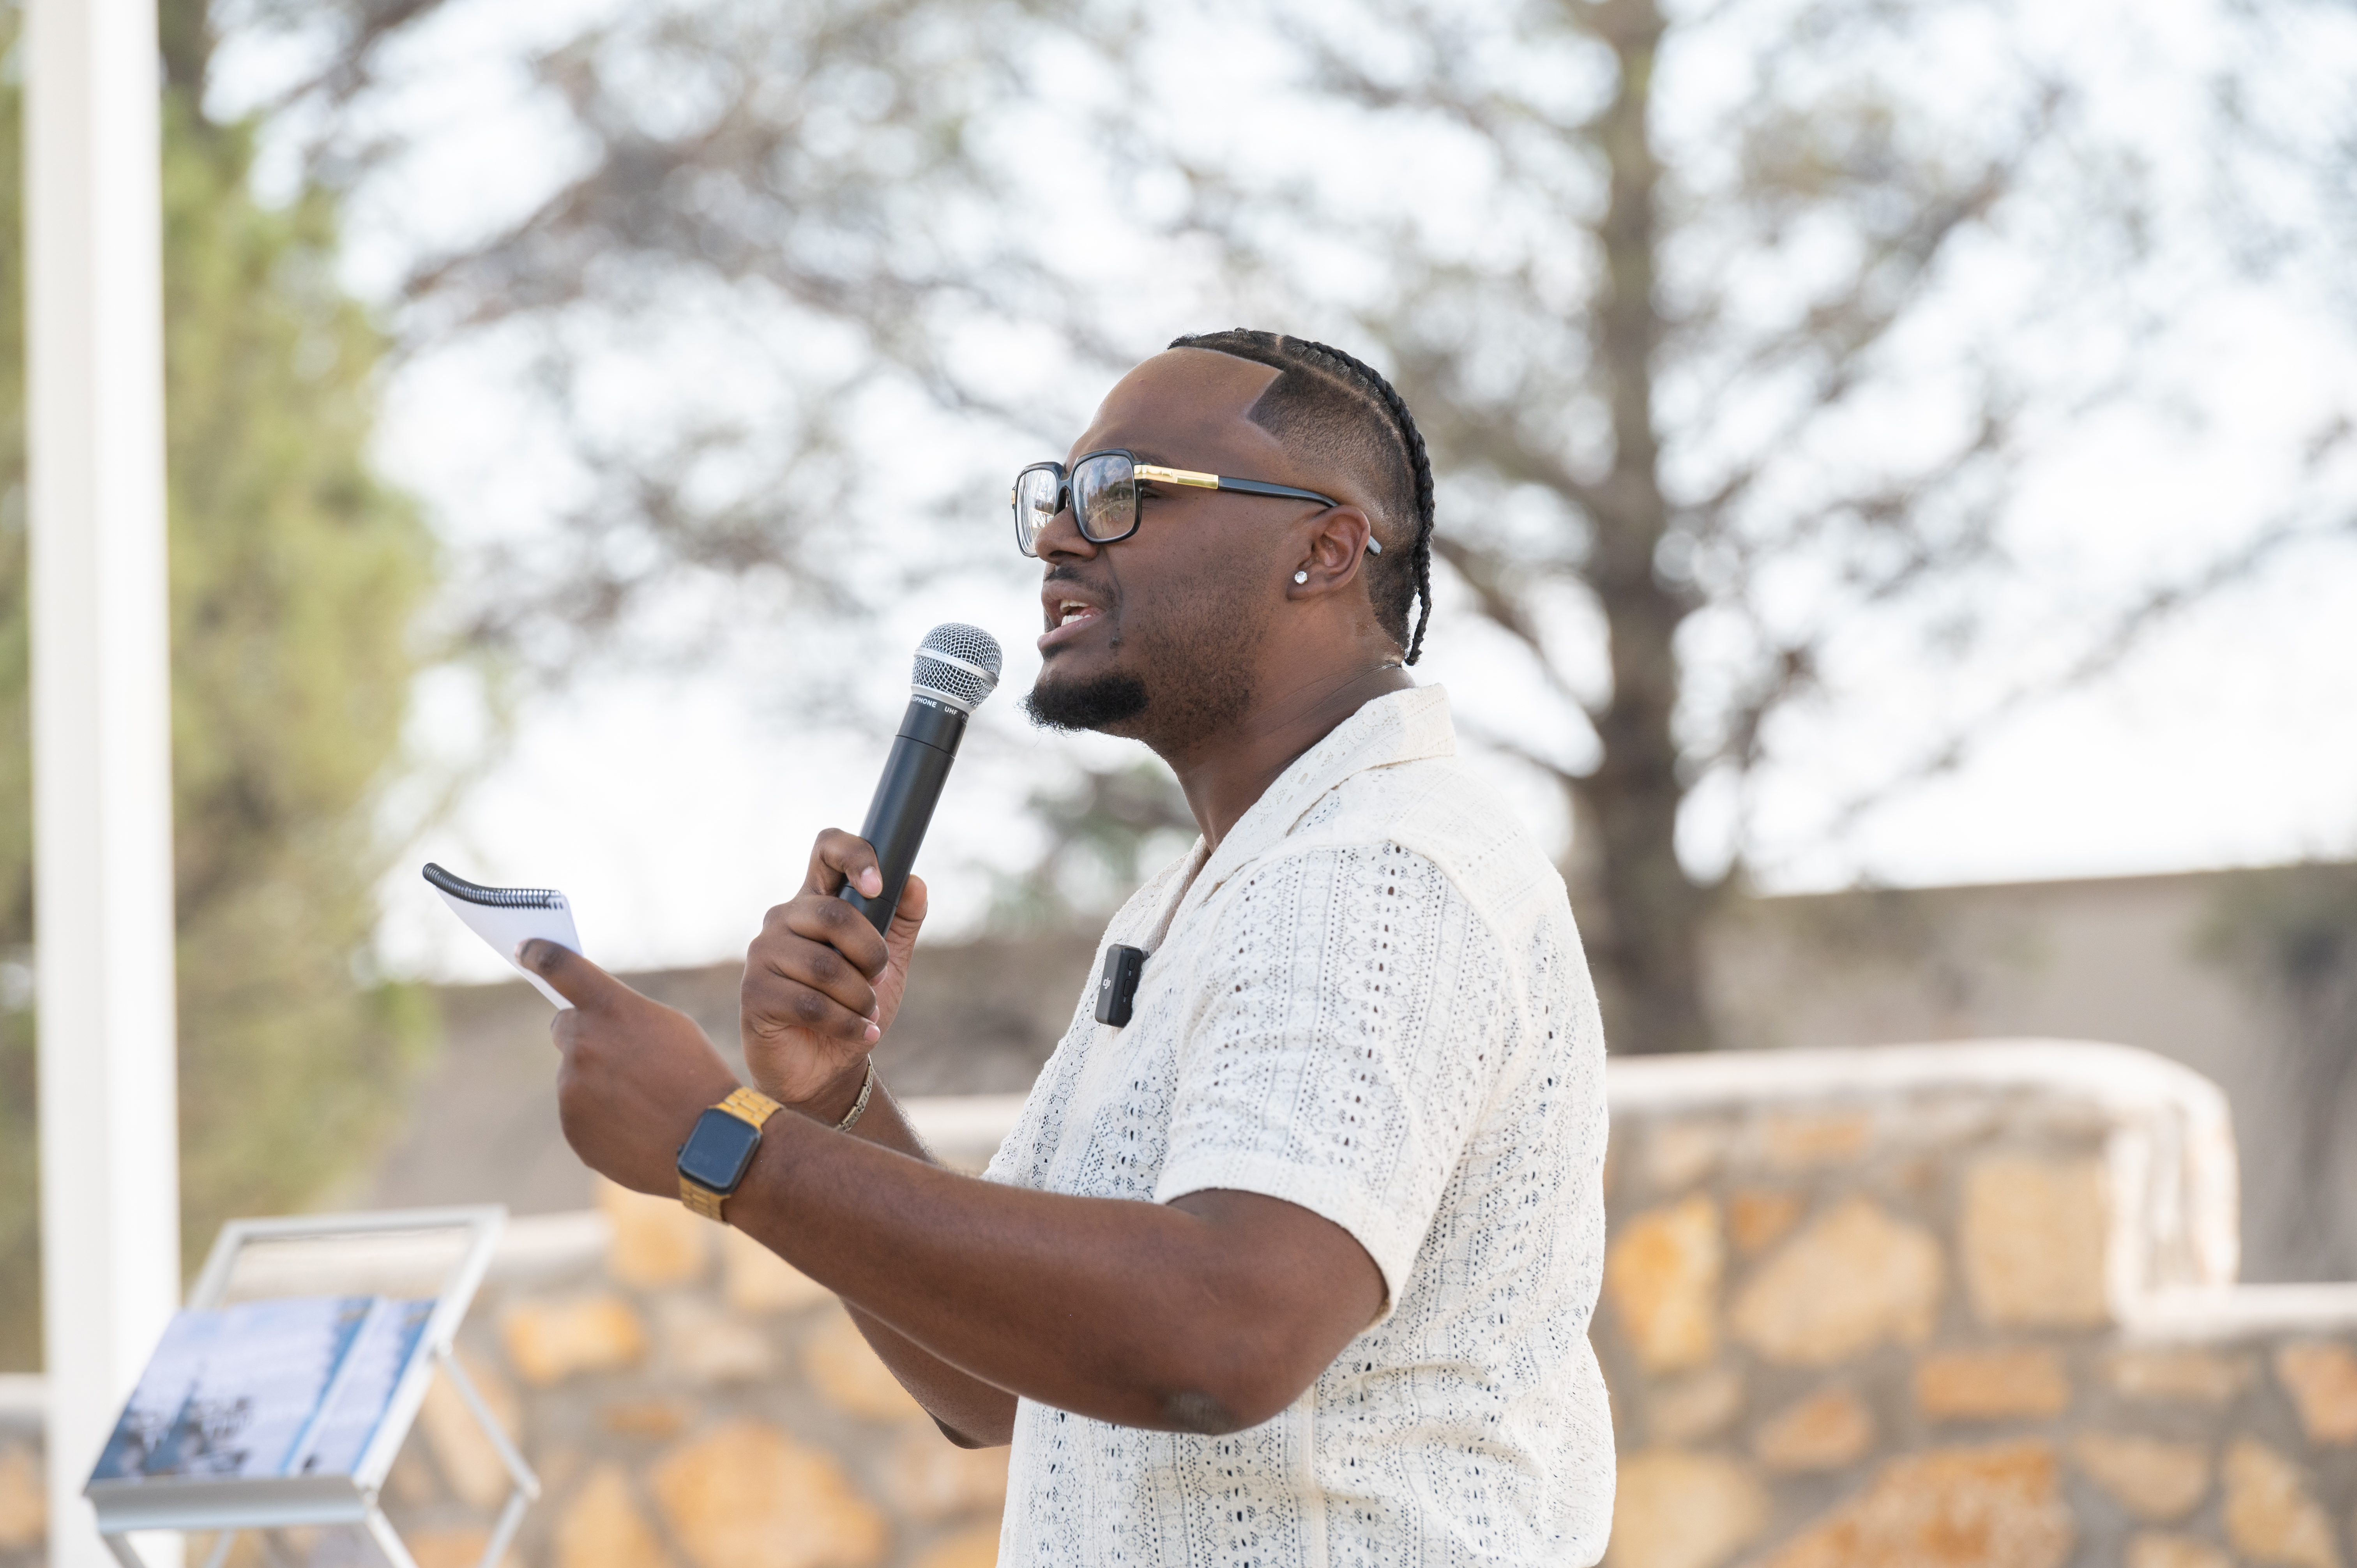 Picture from the celebration of Juneteenth, The image portrays a man standing outdoors, speaking into a microphone with his left hand while holding a small notebook in his right hand. He wears a light-colored, short-sleeved, button-up shirt with a textured pattern. The man has short braided hair, glasses with a thick black frame, and wears a smartwatch with a yellow band on his left wrist. In the background, there is a blurred view of trees and a stone wall, with a small stand or lectern featuring a partially visible book or pamphlet with an image on its cover.